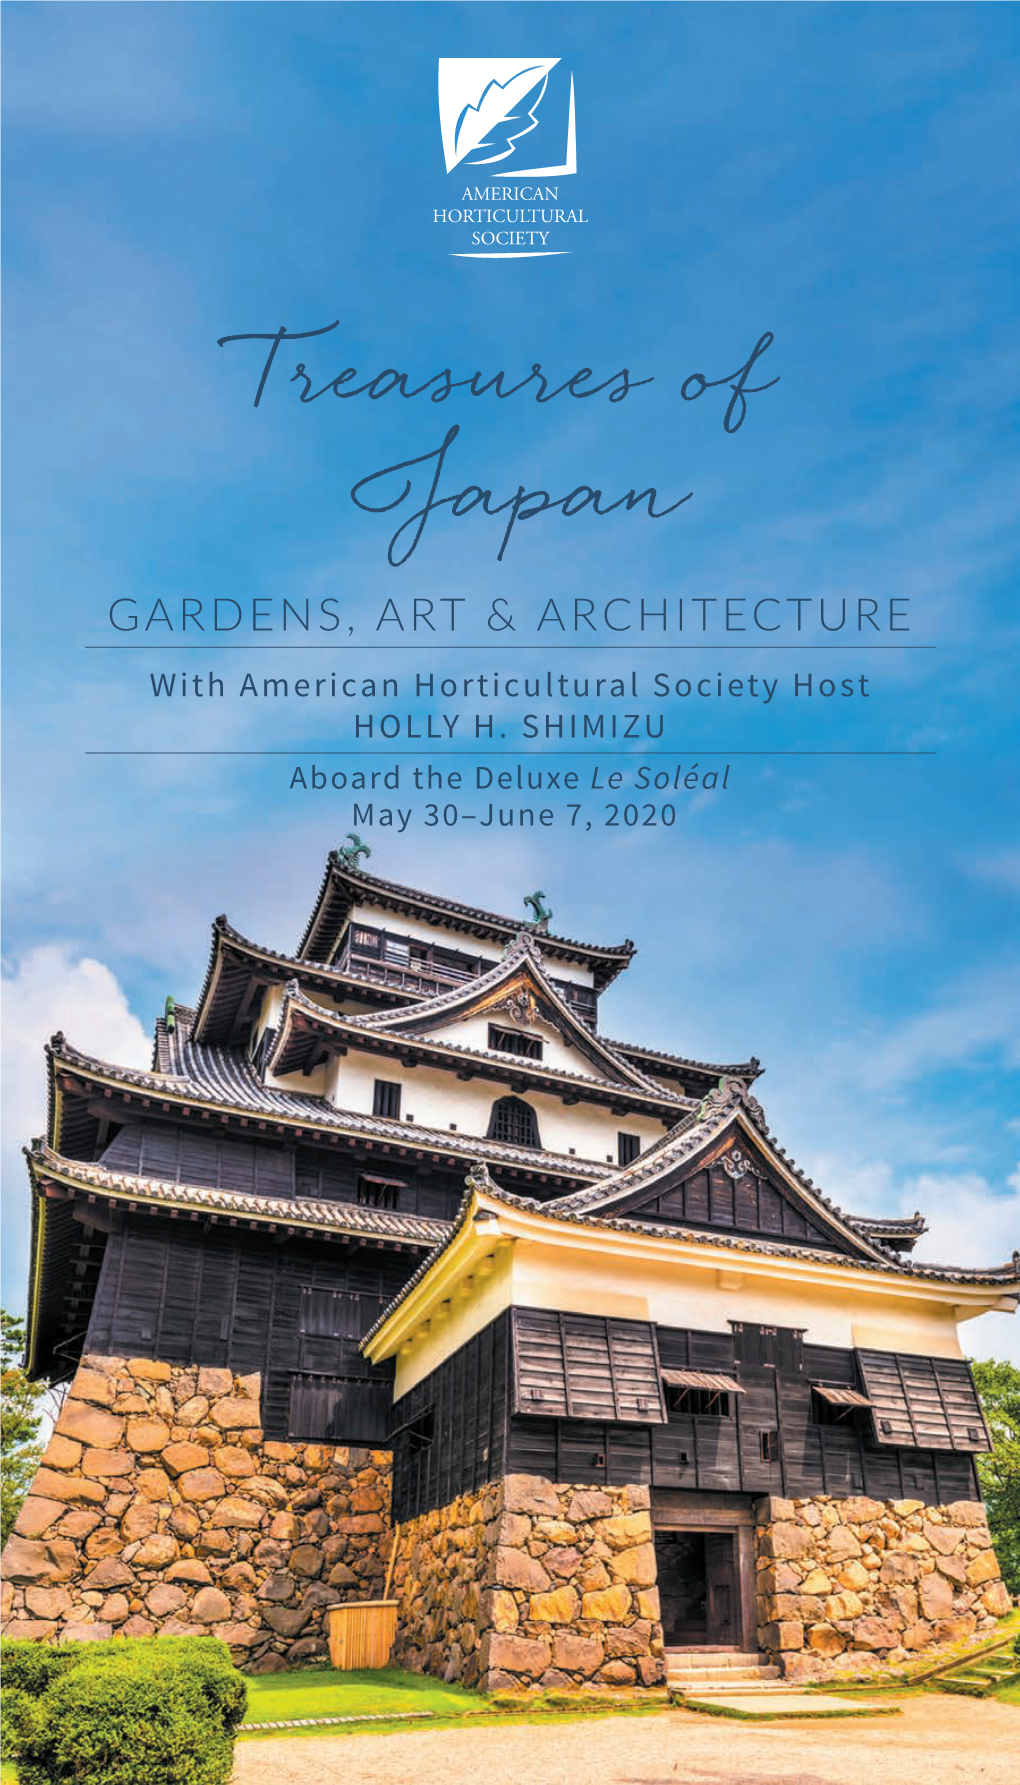 Treasures of Japan GARDENS, ART & ARCHITECTURE with American Horticultural Society Host HOLLY H